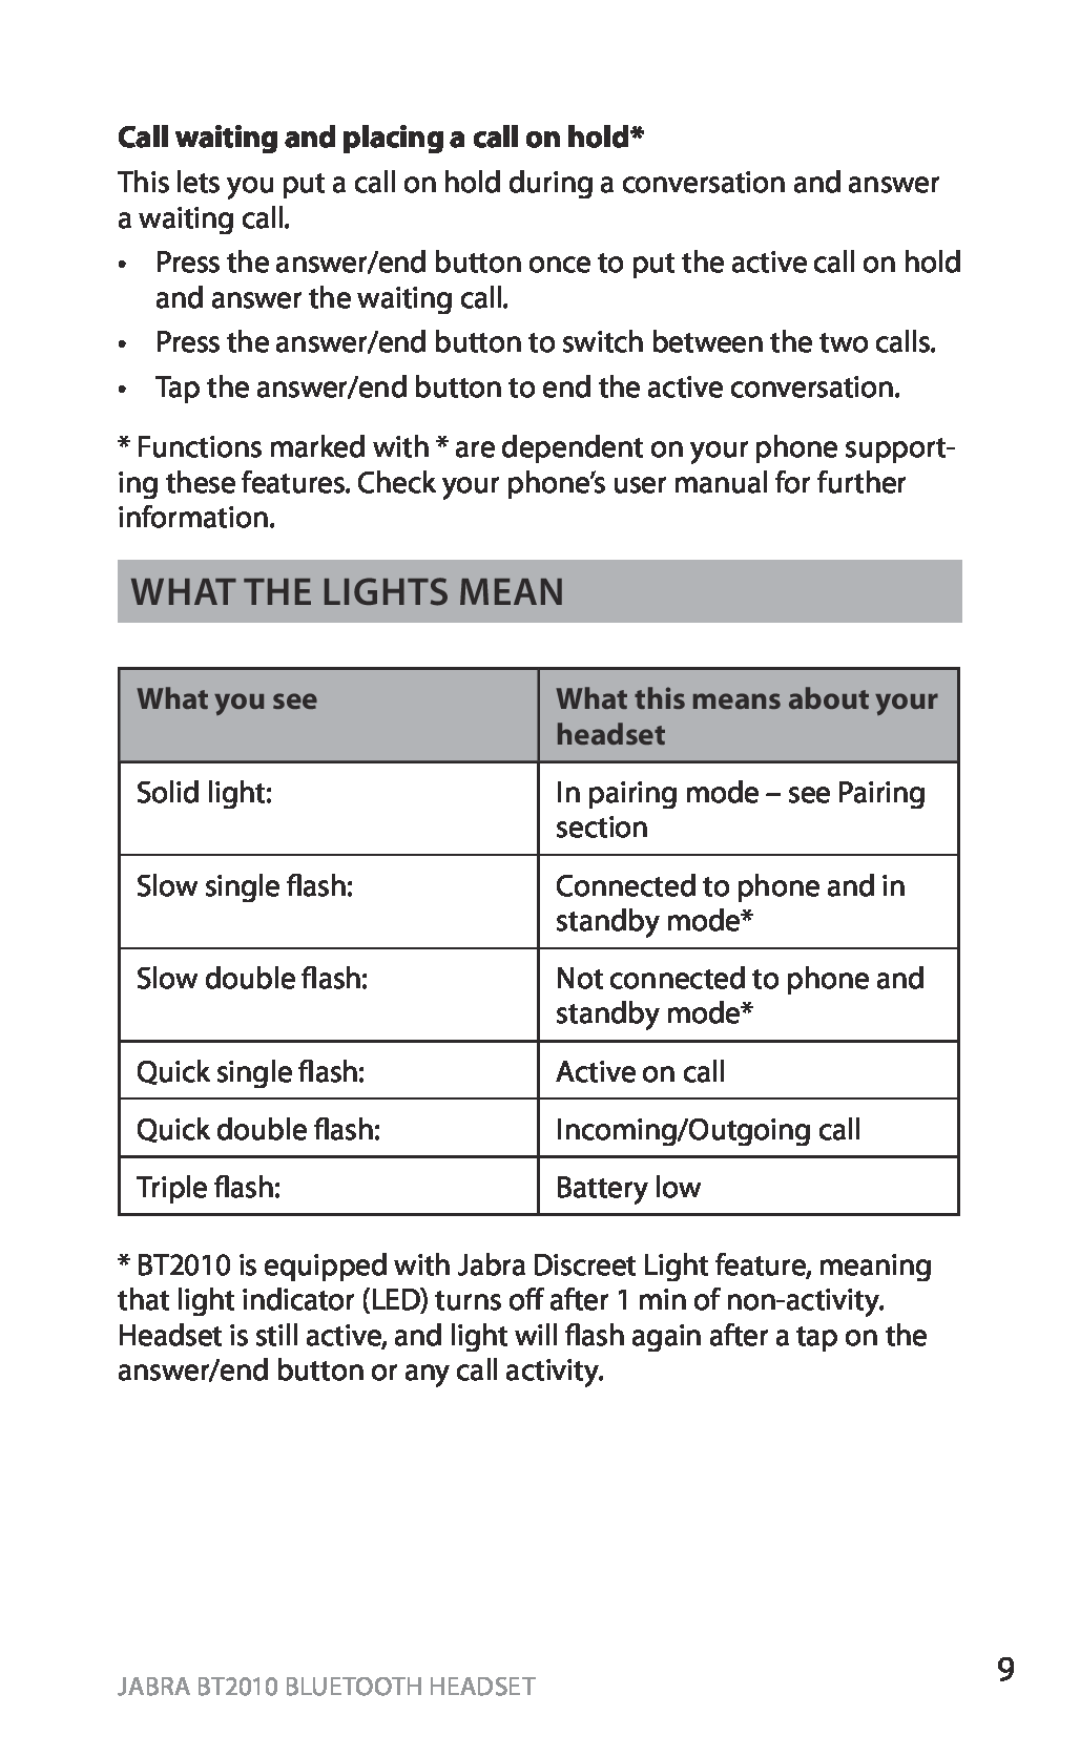 Jabra BT2010 What the lights mean, Call waiting and placing a call on hold, What you see, What this means about your 